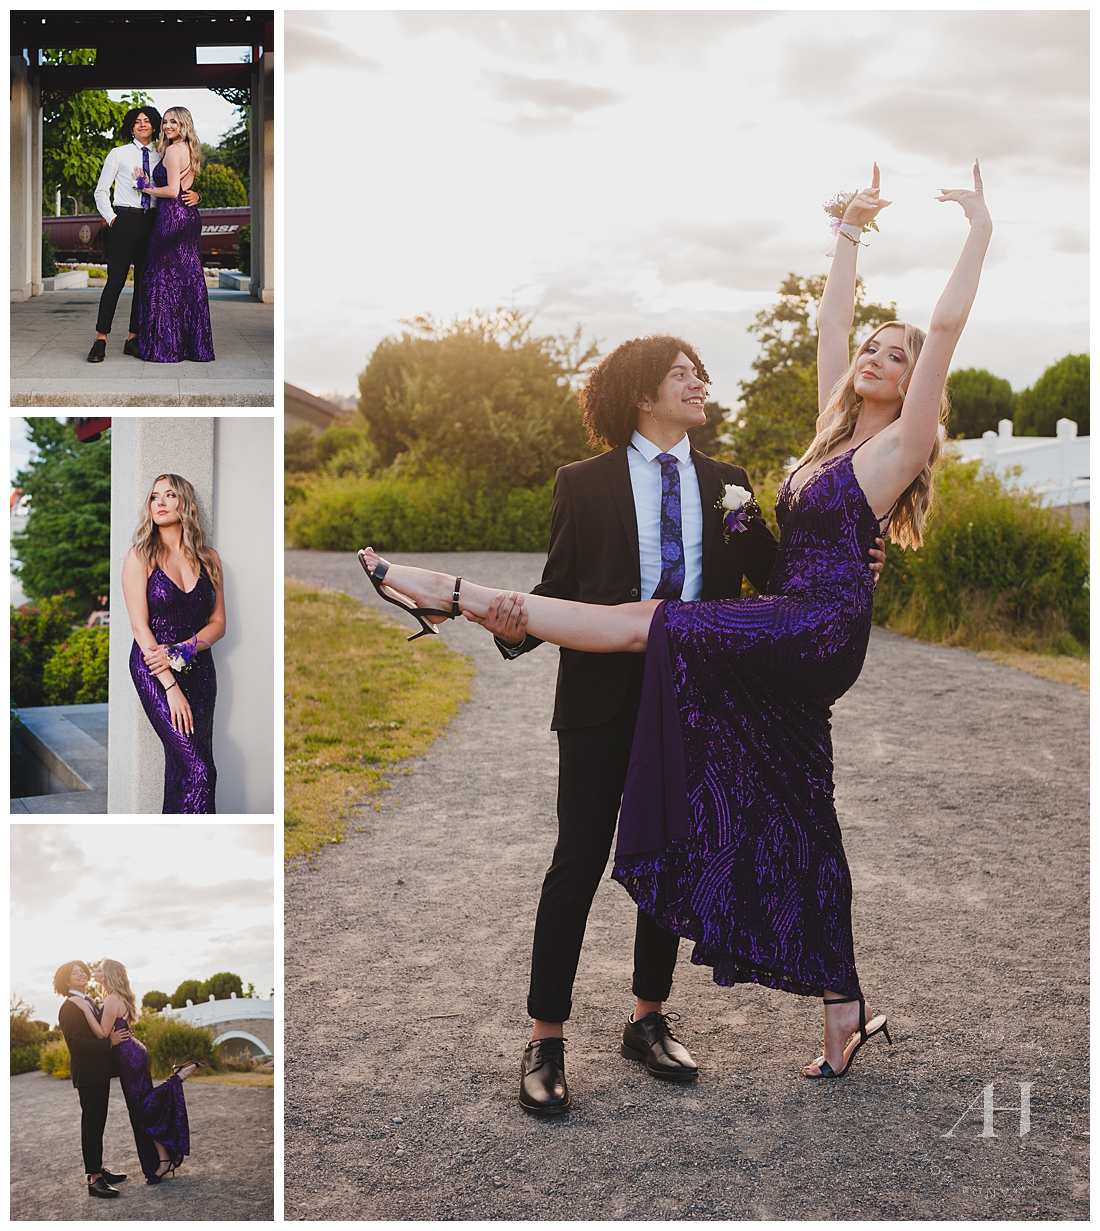 Dance Poses for Prom Portraits | 2021 Prom Mini Sessions in Tacoma with Amanda Howse Photography | How to Book Prom Portraits in Tacoma